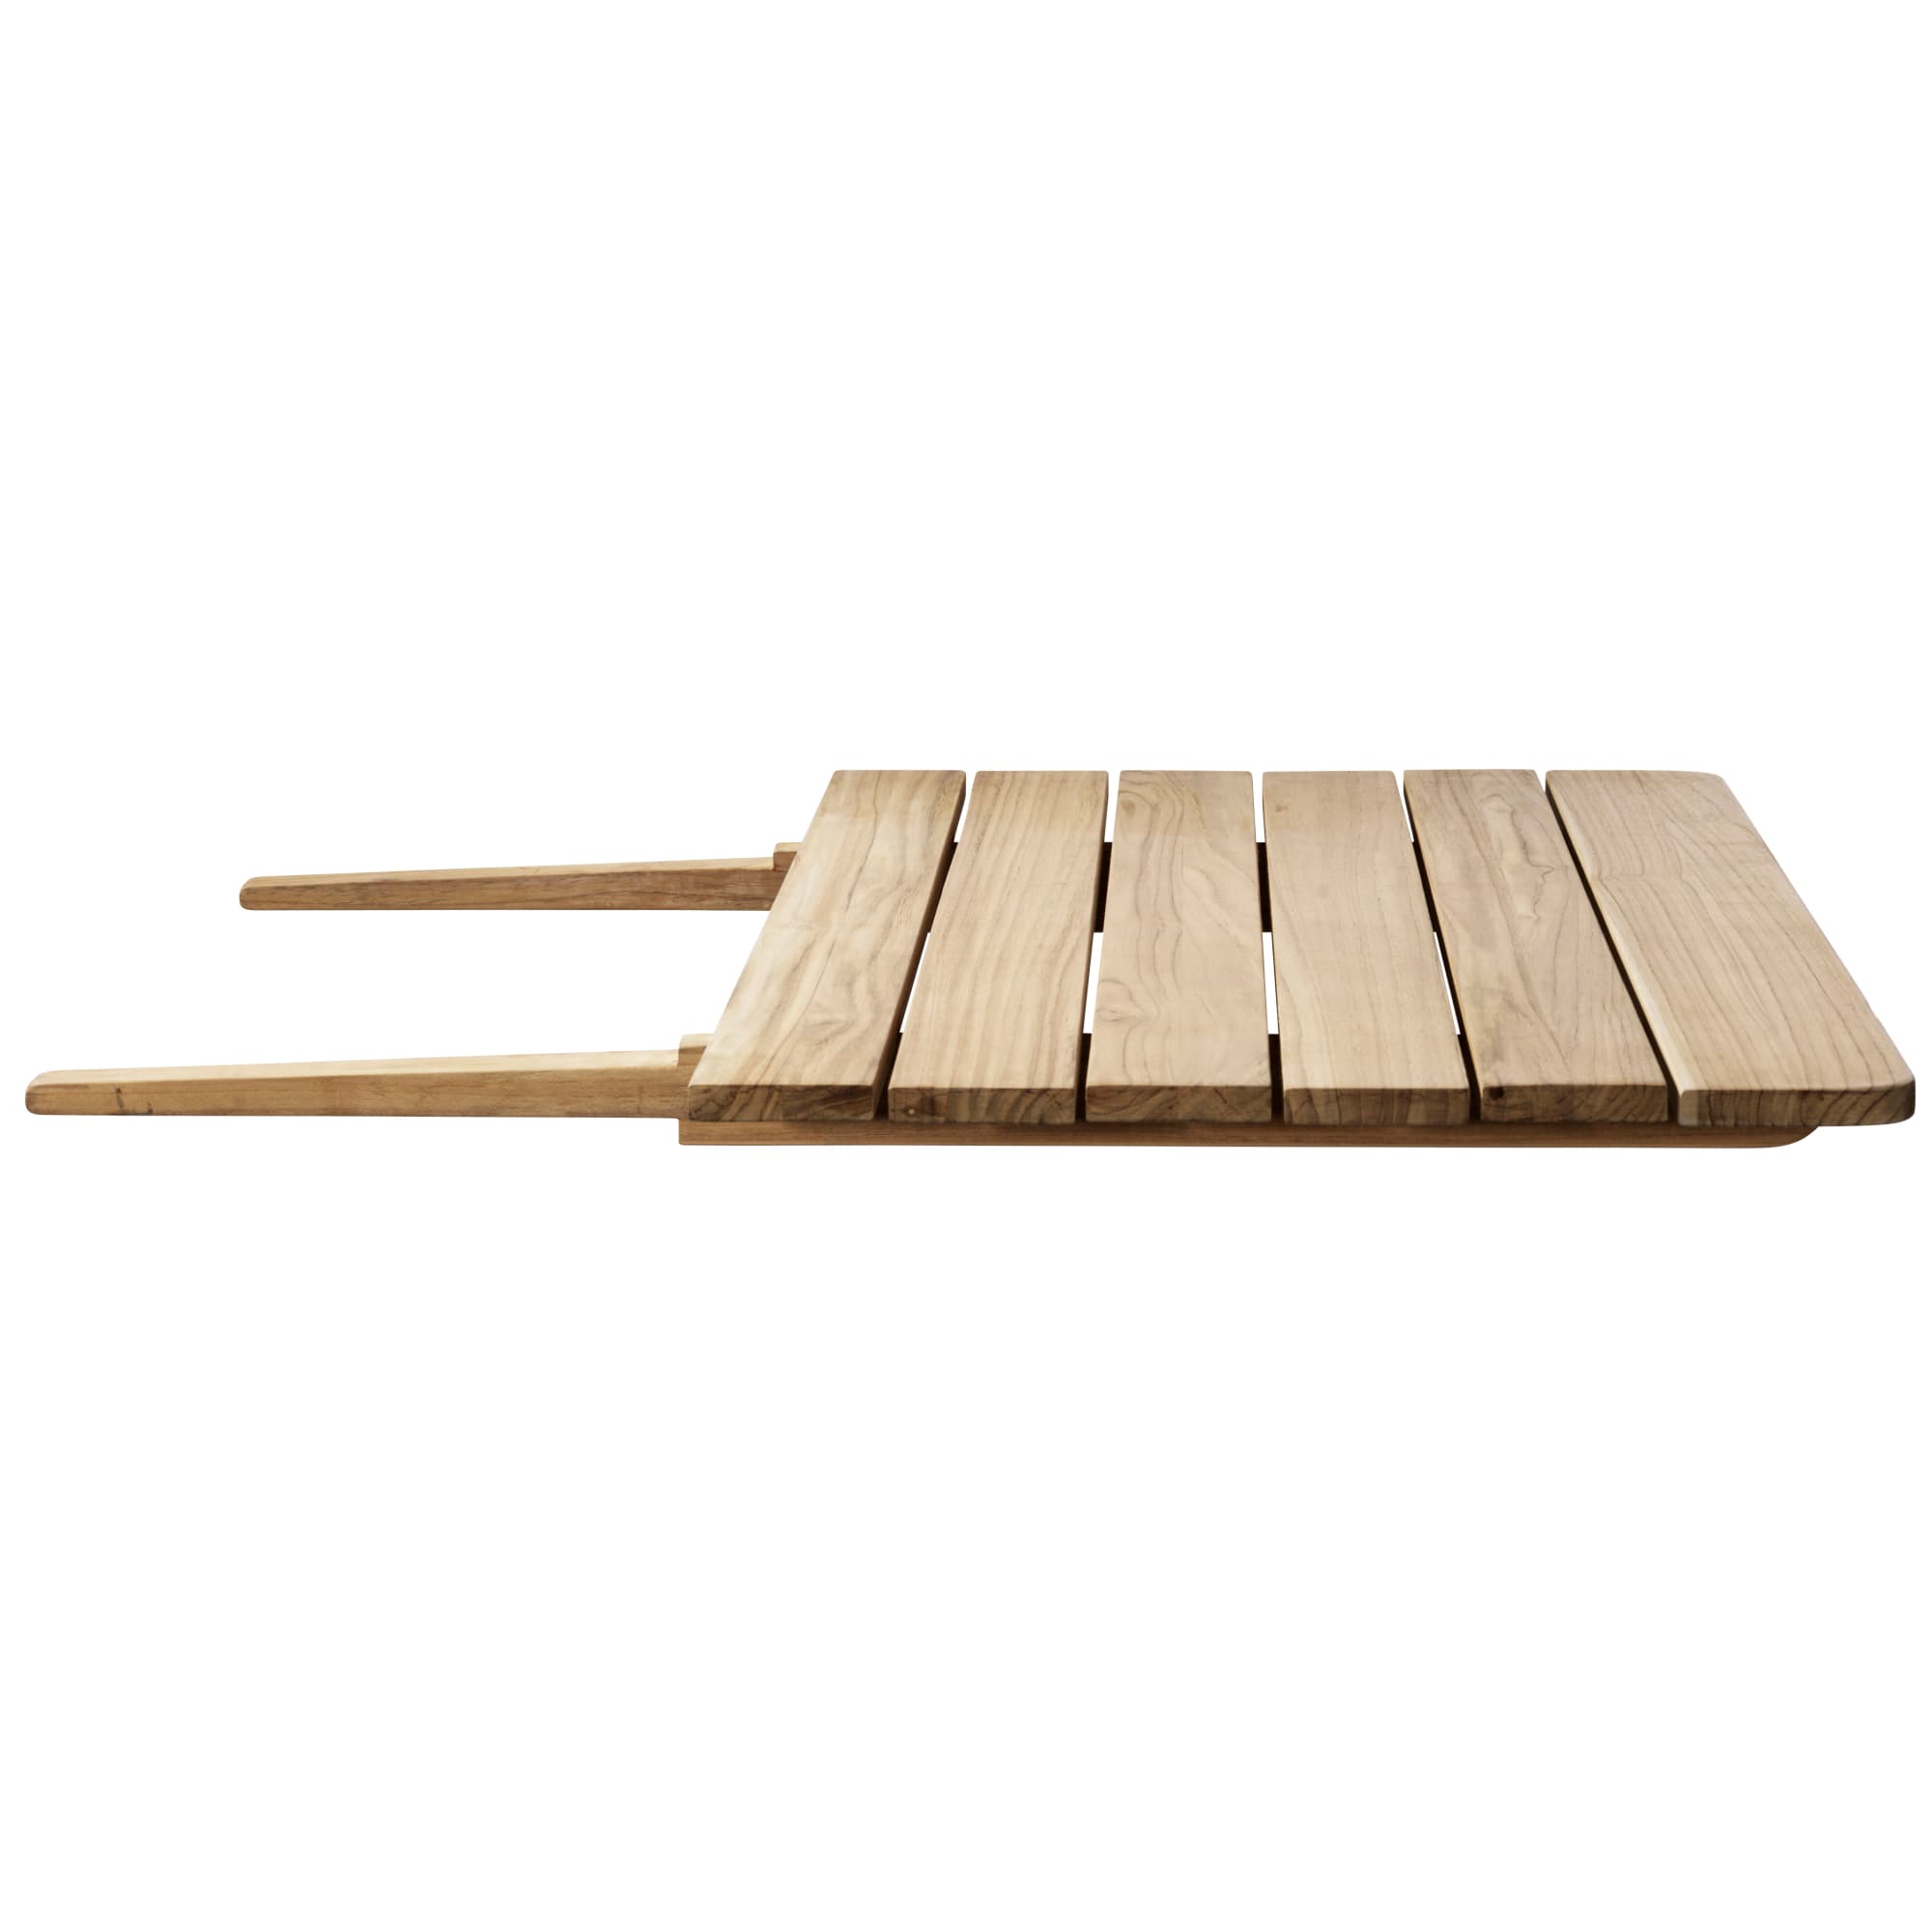 Fdb Møbler M5 Together Extension Plate For M2 And M4 Garden Table, Teak